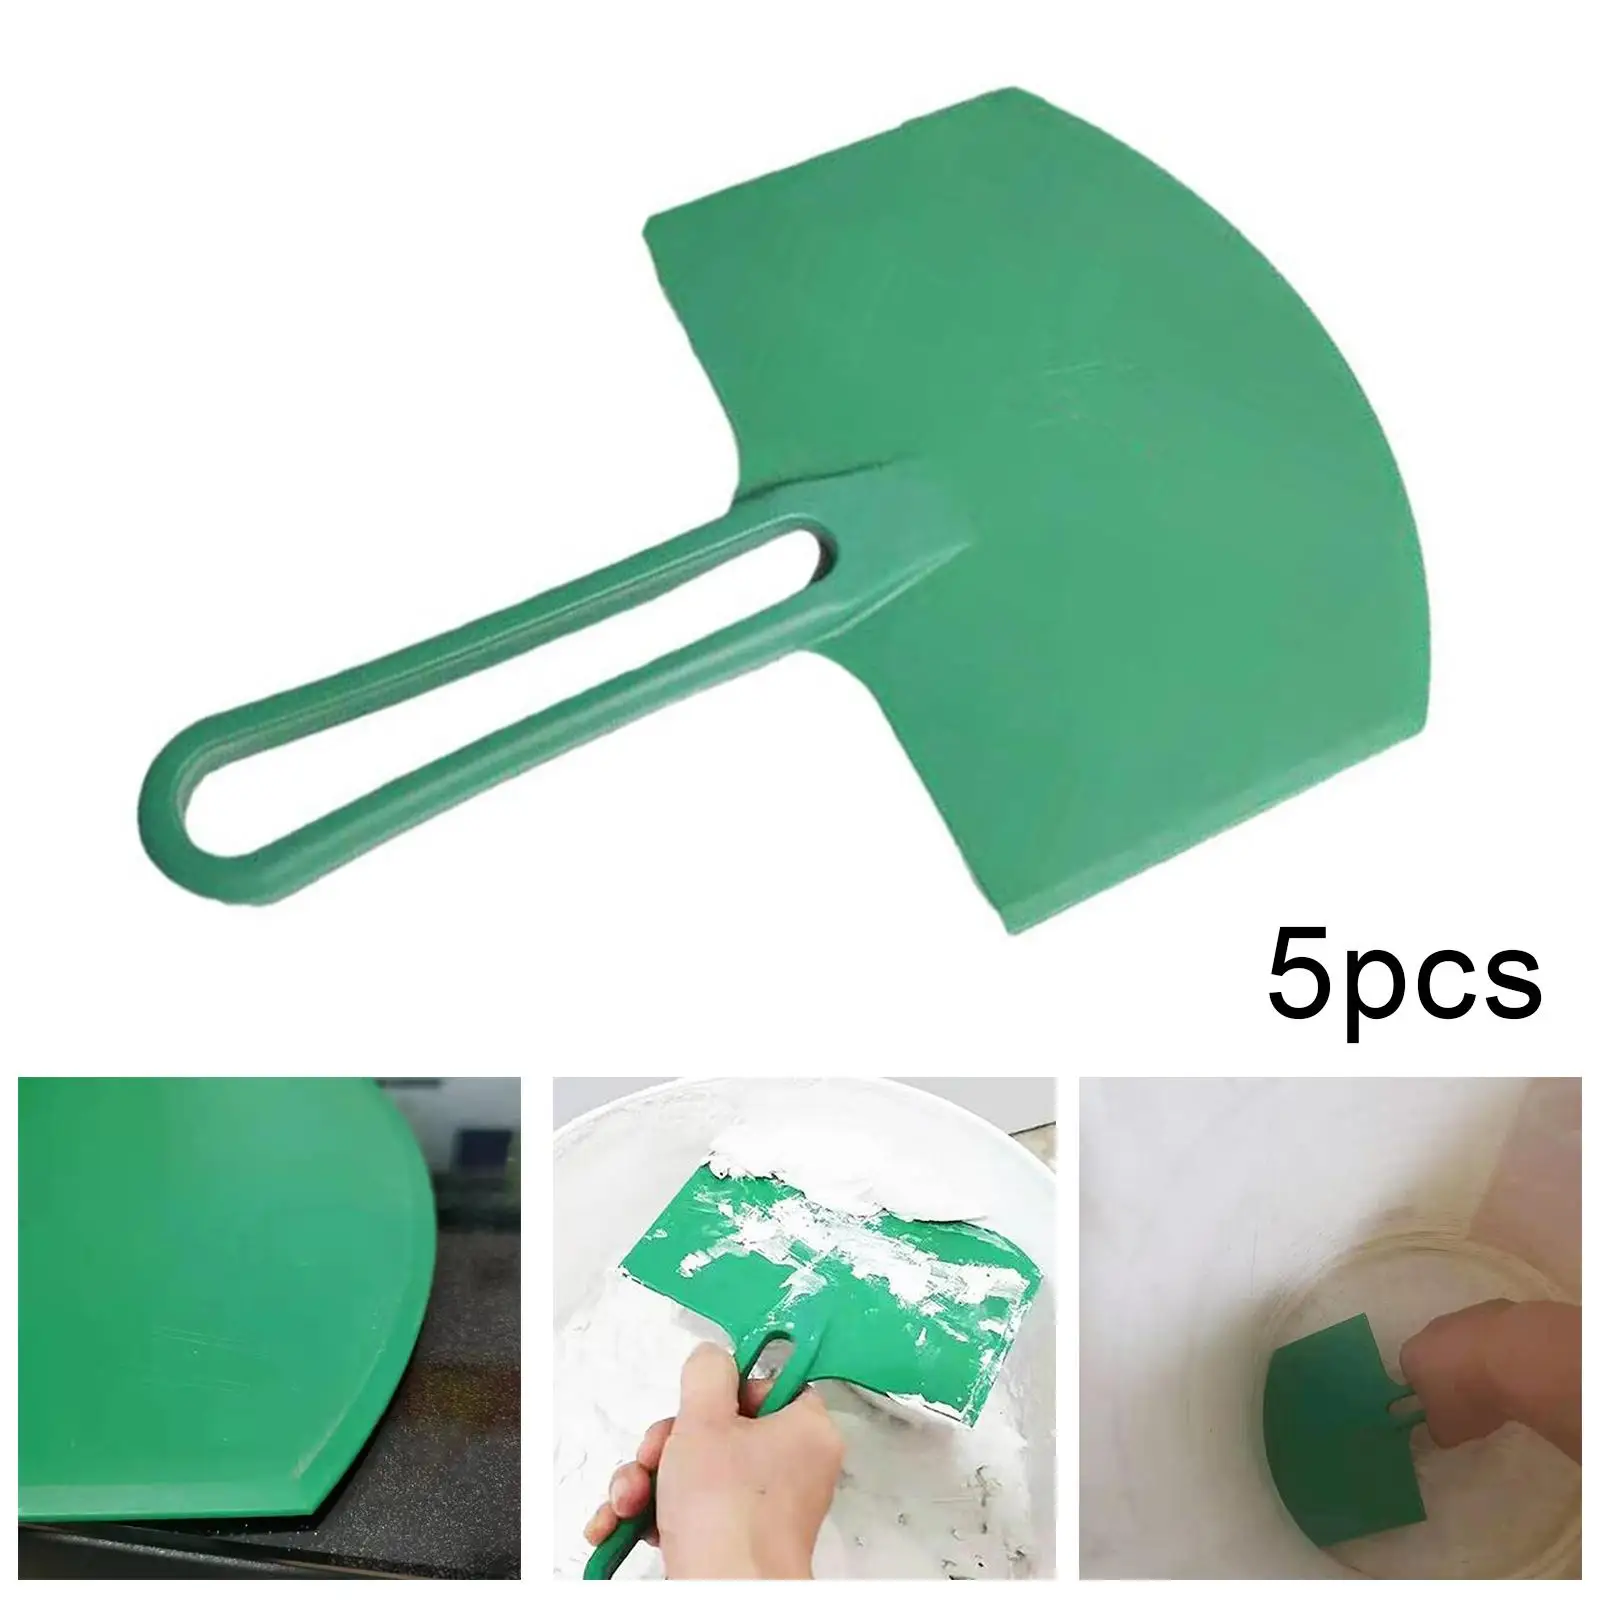 Flexible Plastic Paint Scrapers Knife Spreader Spackle Scrapers for Repairing Wall Wall Painting Home Improvement